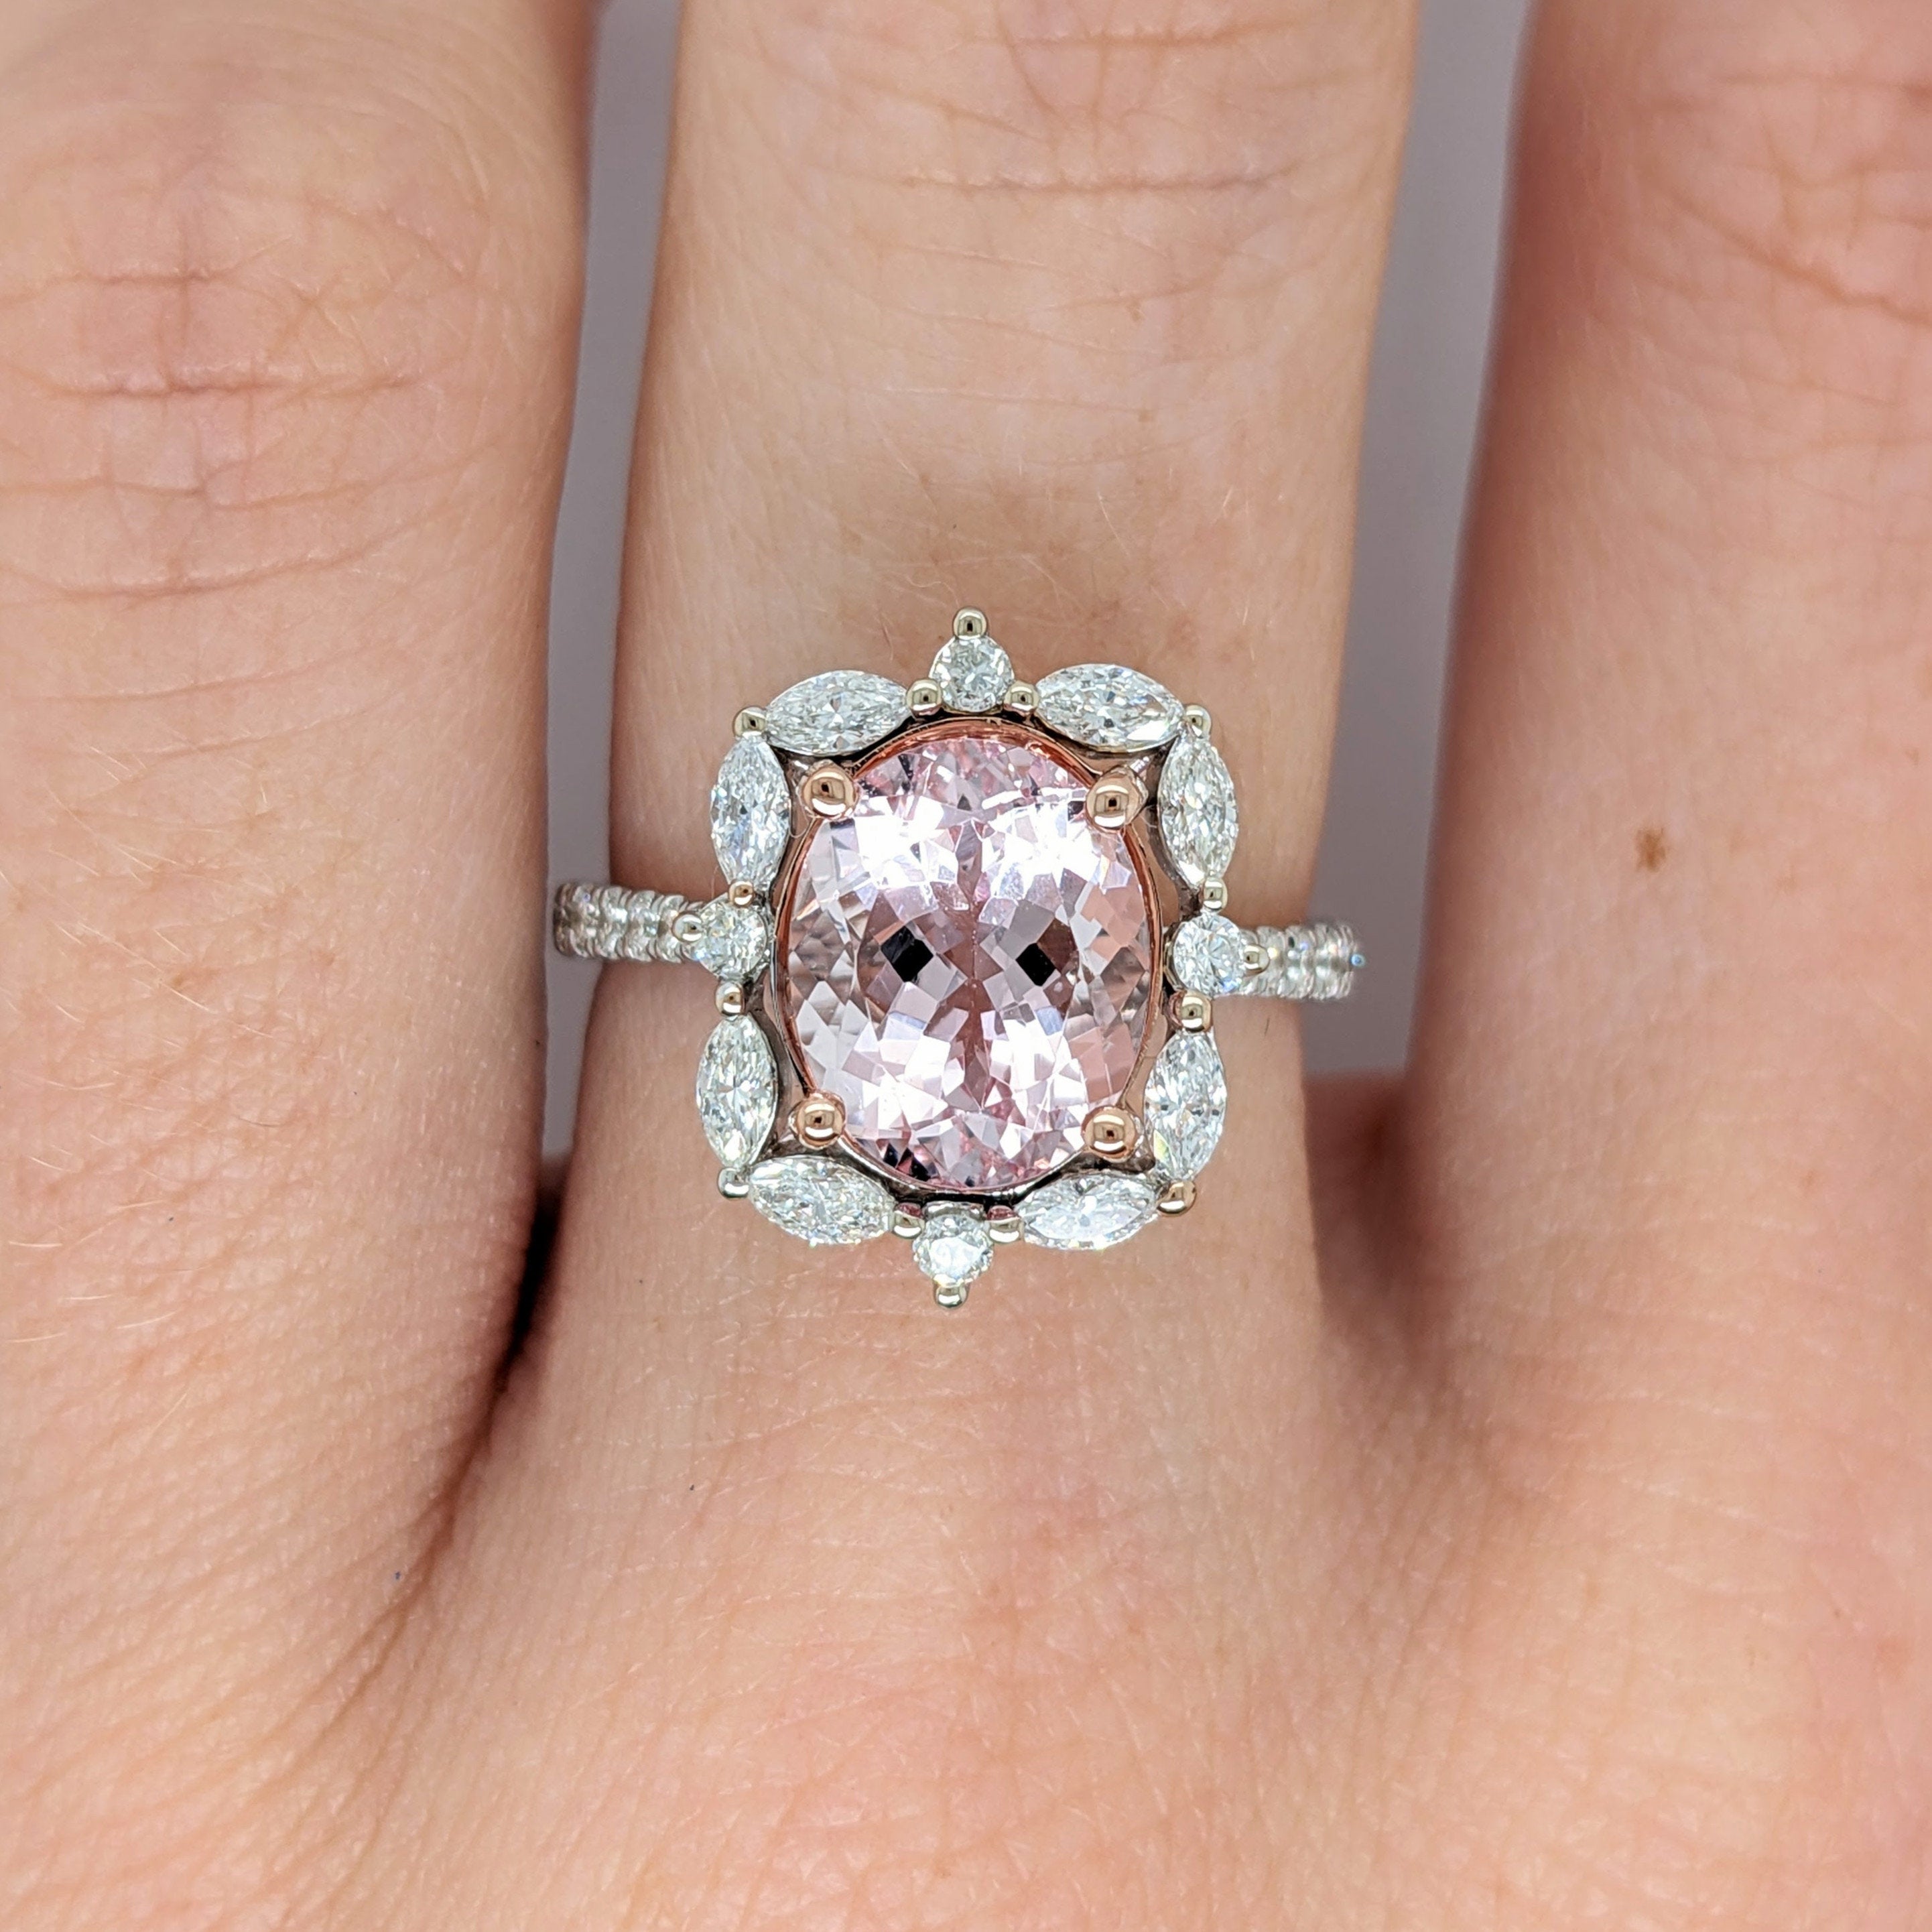 Glam Pink Morganite Ring in Solid 14K Dual White/Rose Gold w Natural Diamond Accents | Oval Cut 11x9mm | Prong Setting | Pink Gemstone